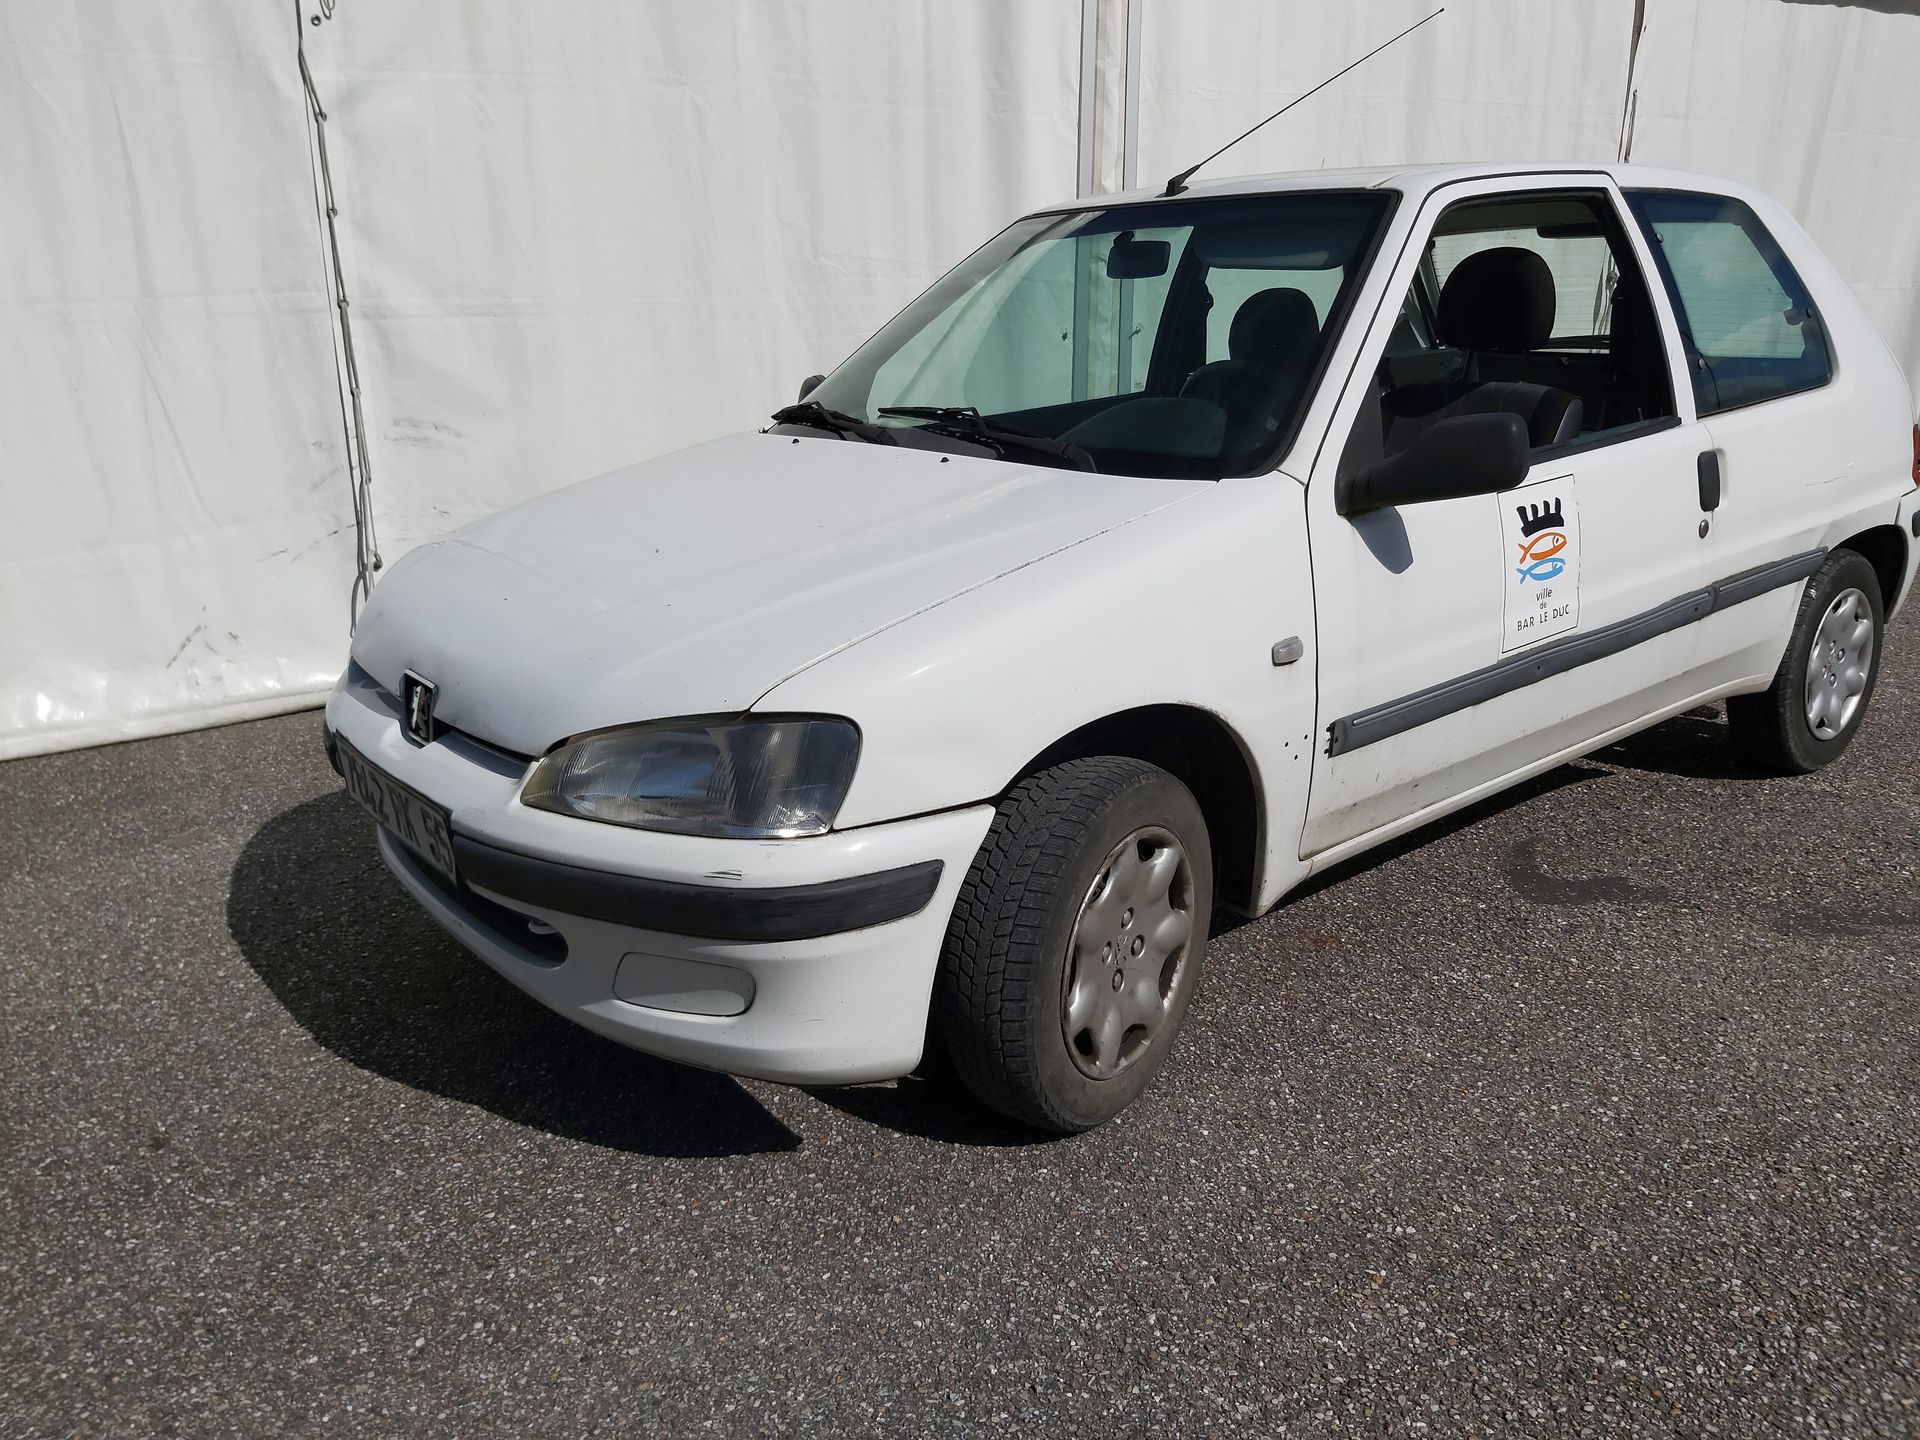 Null PEUGEOT 106 from 2002 mileage : 60500km Petrol engine

无CT